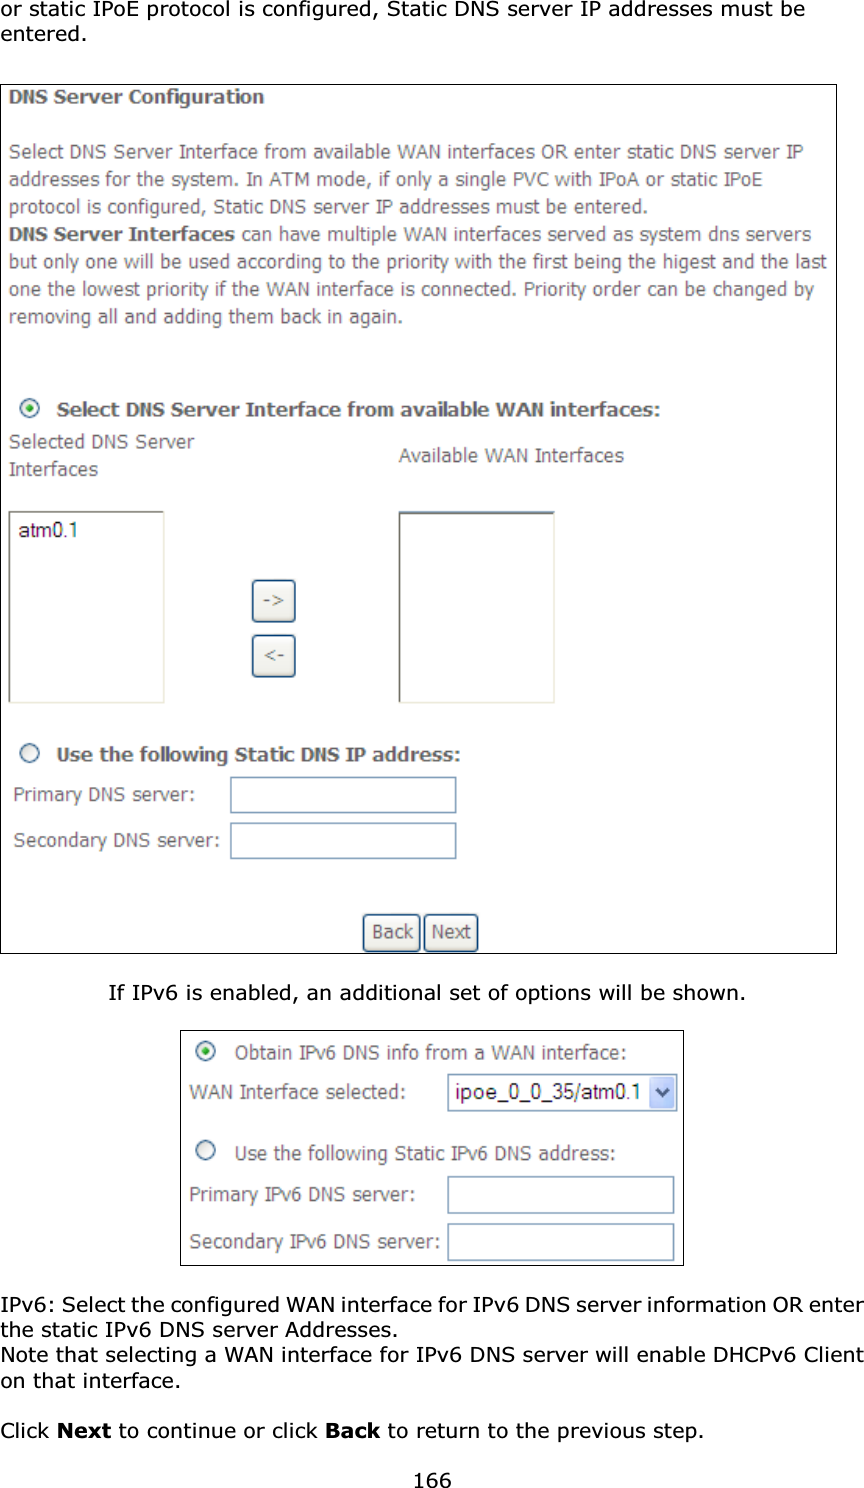  166or static IPoE protocol is configured, Static DNS server IP addresses must be entered.      If IPv6 is enabled, an additional set of options will be shown.      IPv6: Select the configured WAN interface for IPv6 DNS server information OR enter the static IPv6 DNS server Addresses. Note that selecting a WAN interface for IPv6 DNS server will enable DHCPv6 Client on that interface.  Click Next to continue or click Back to return to the previous step. 